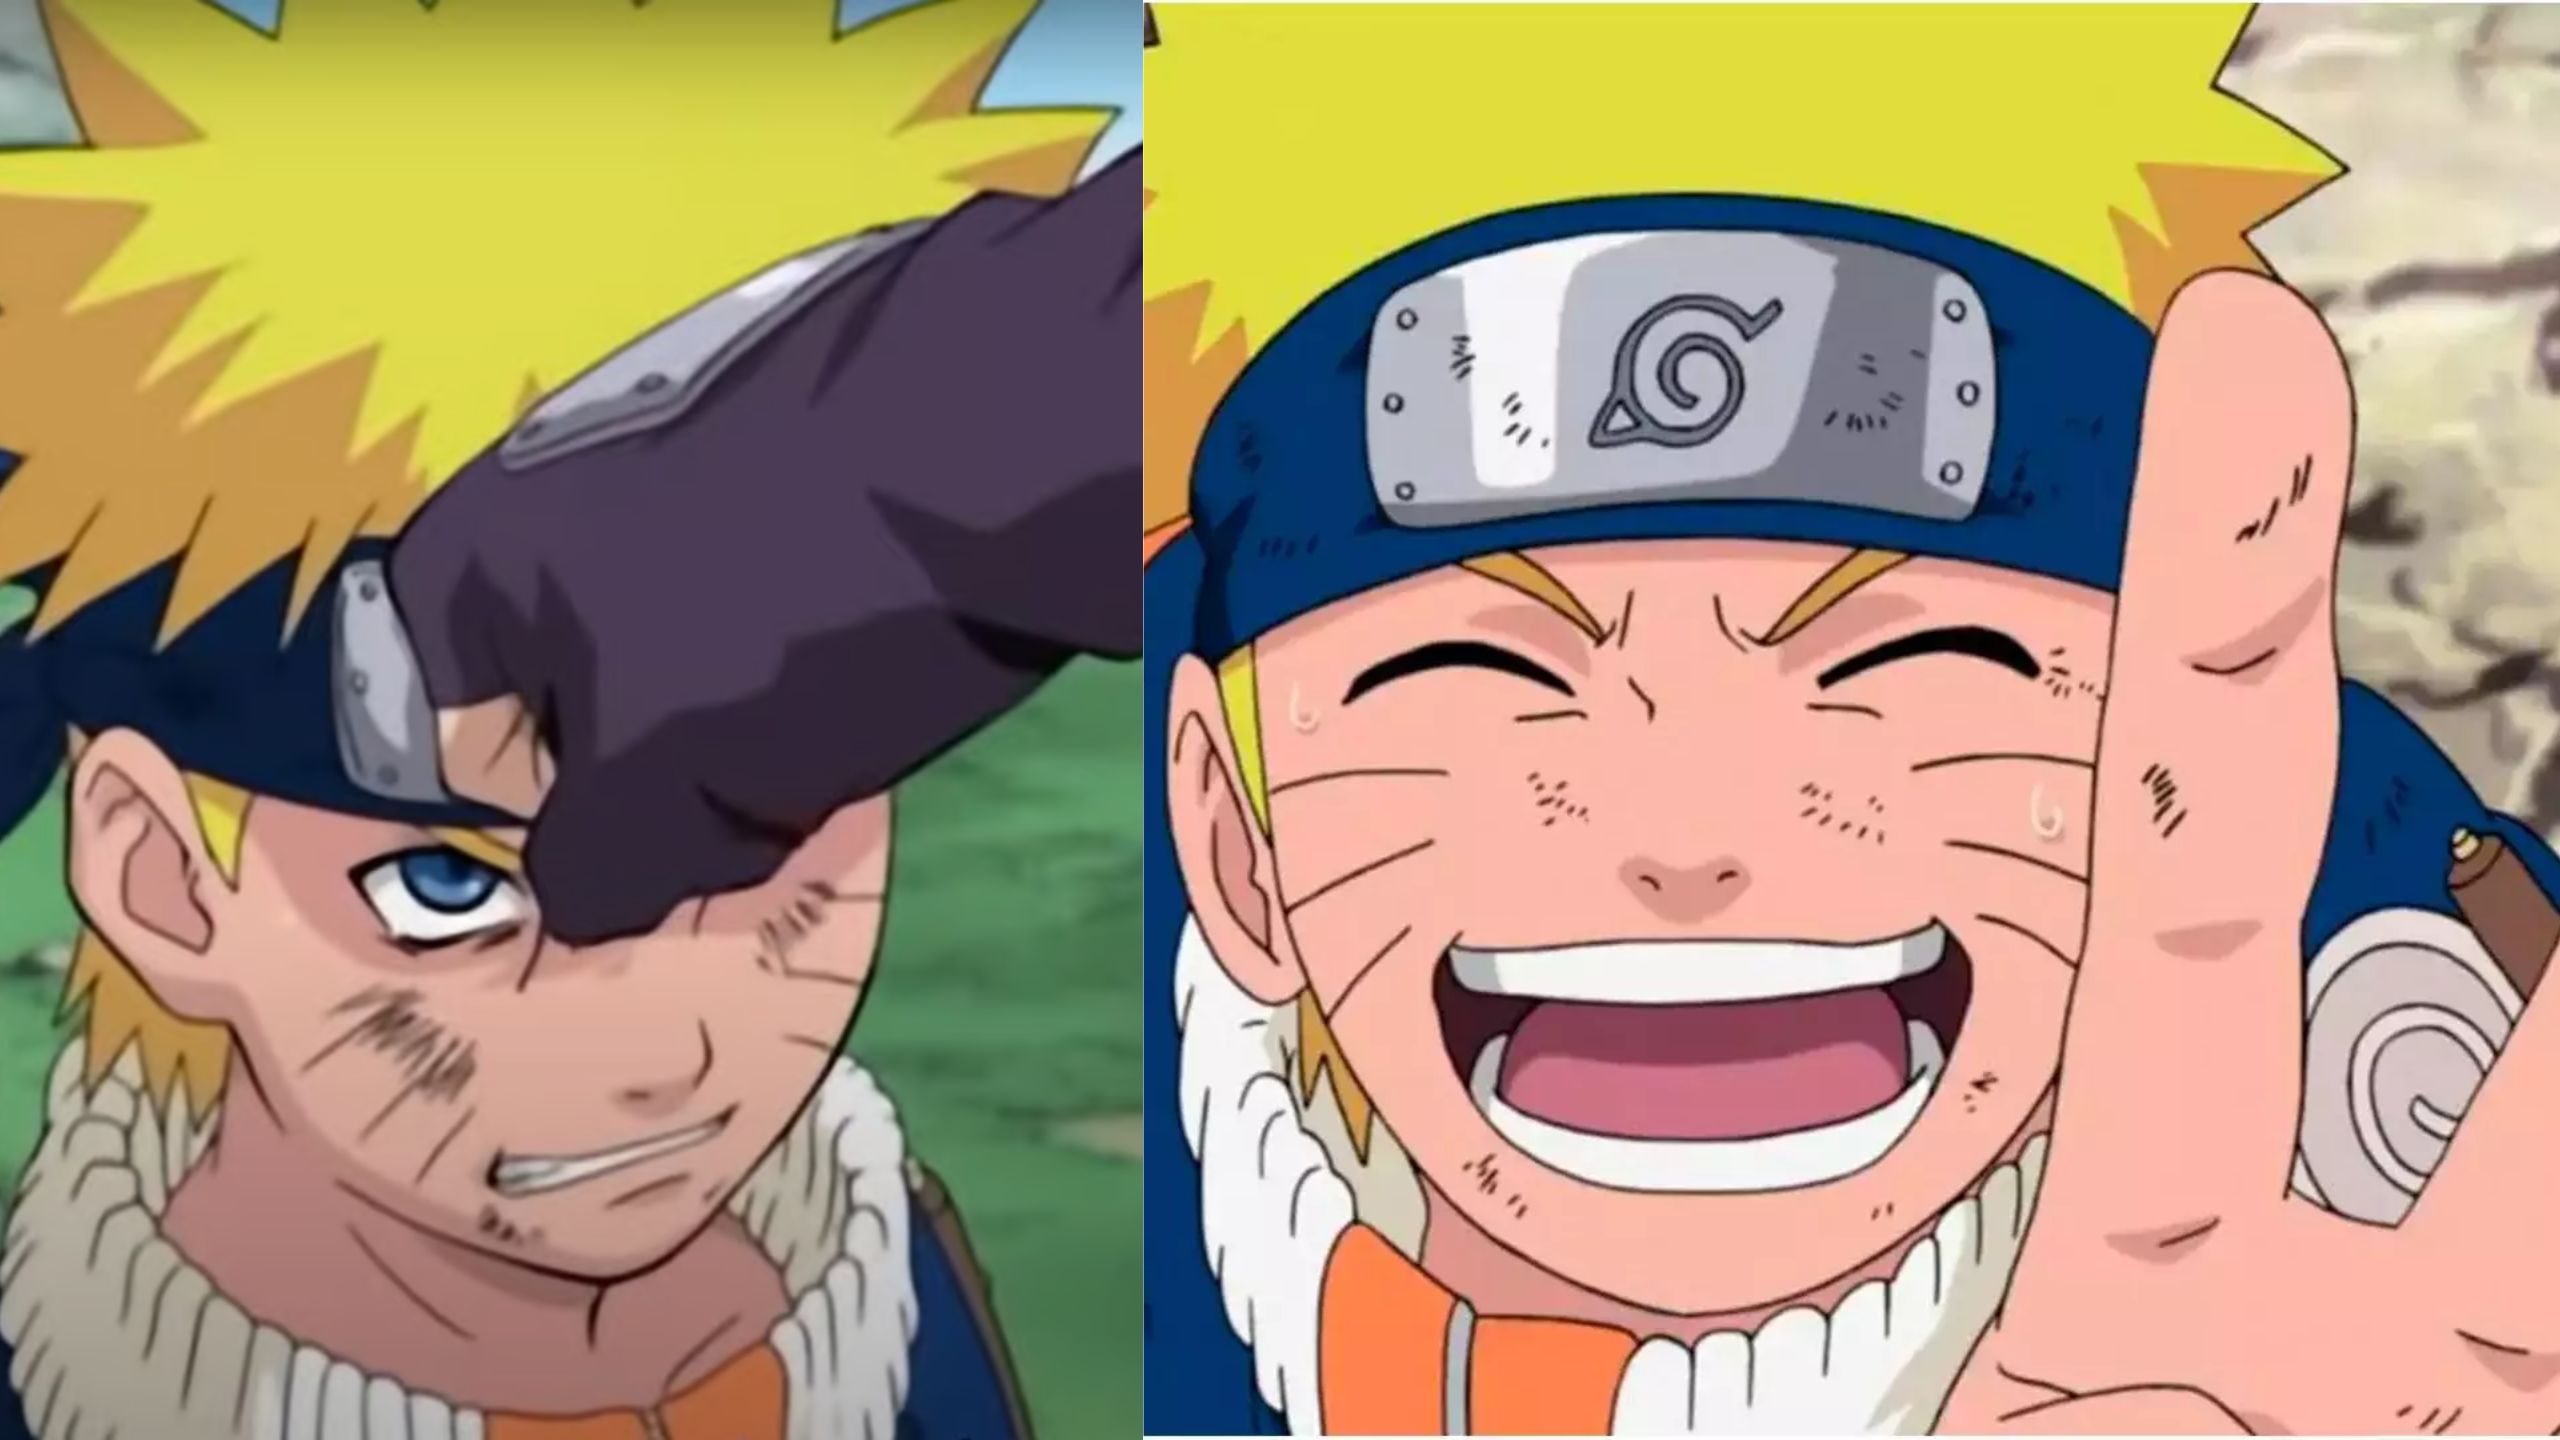 Naruto: A Must-Watch Anime Offering Adventure and Connection for the Entire Family Across Generations